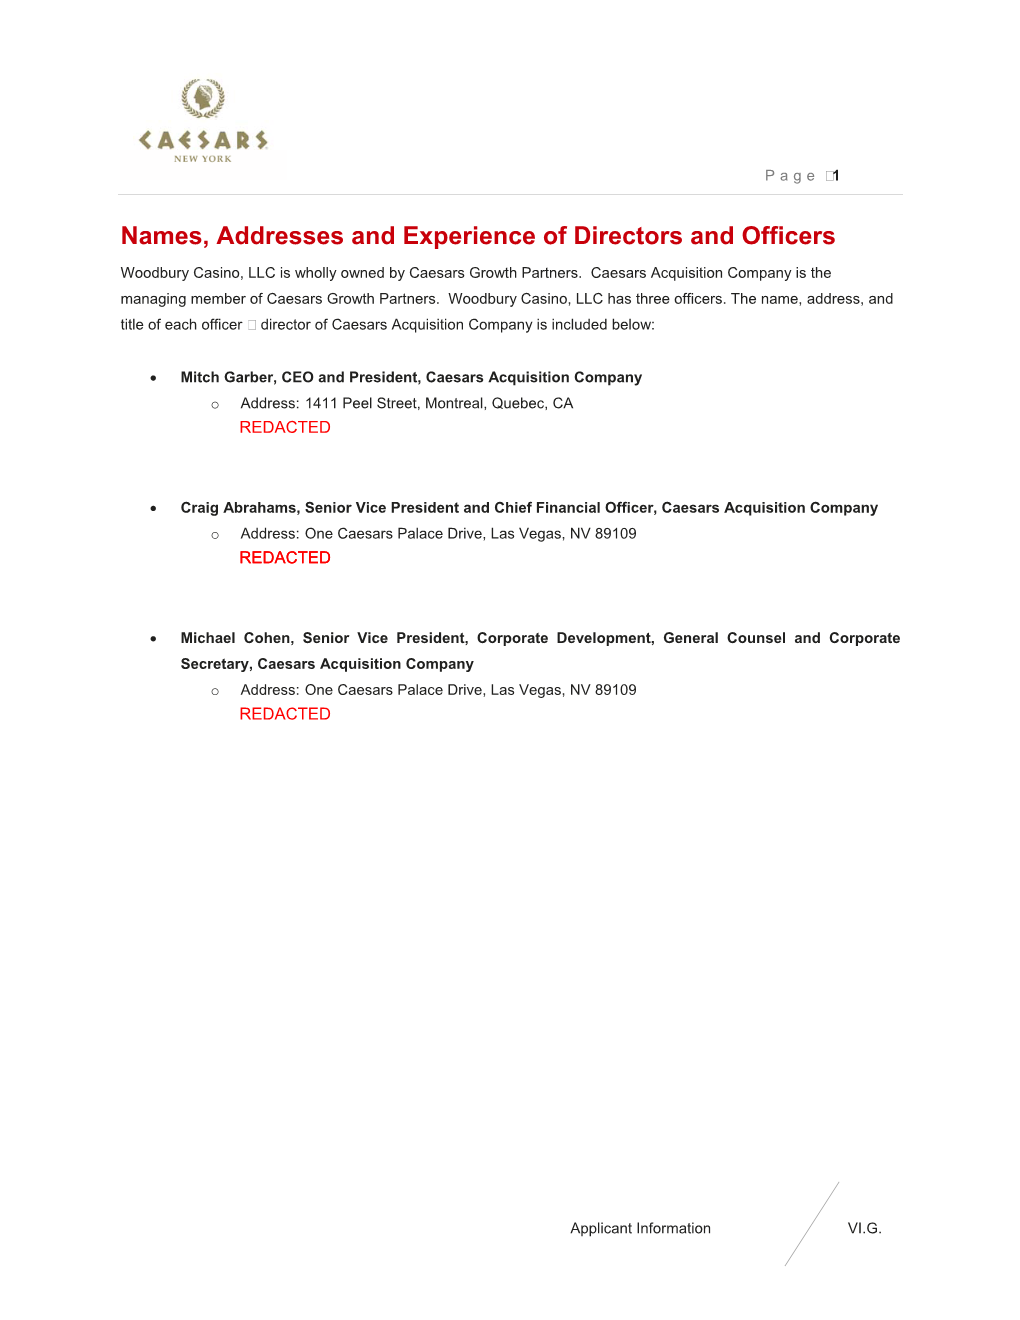 Names, Addresses and Experience of Directors and Officers